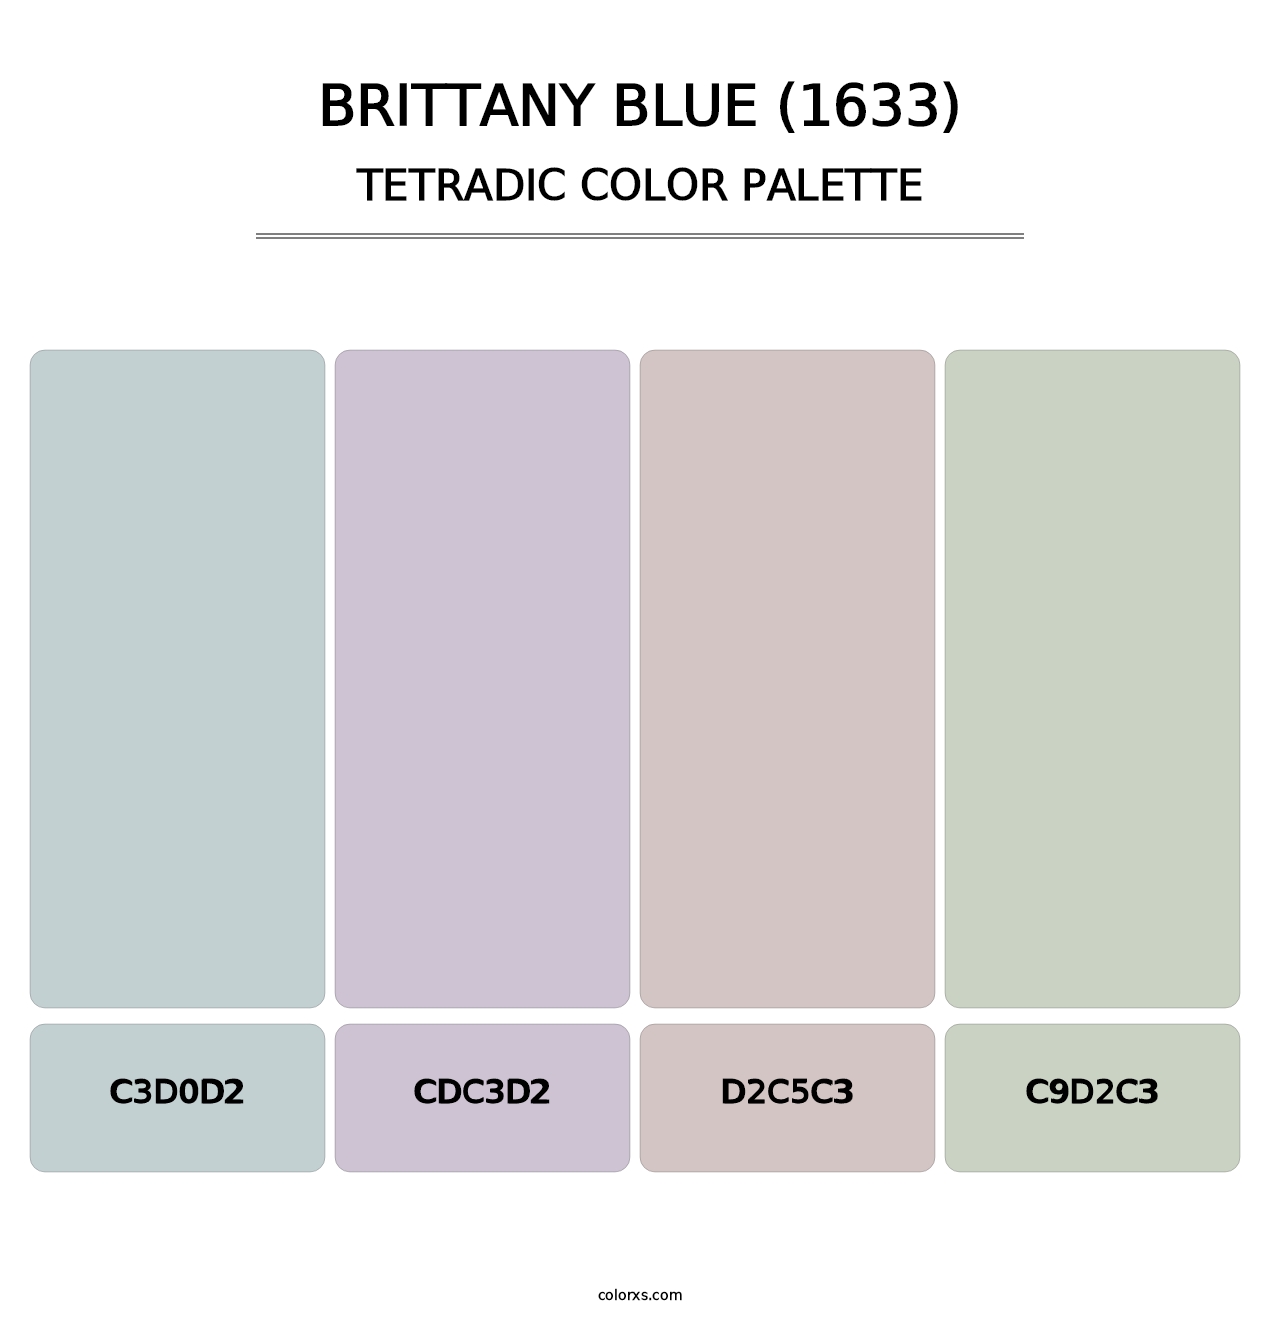 Brittany Blue (1633) - Tetradic Color Palette